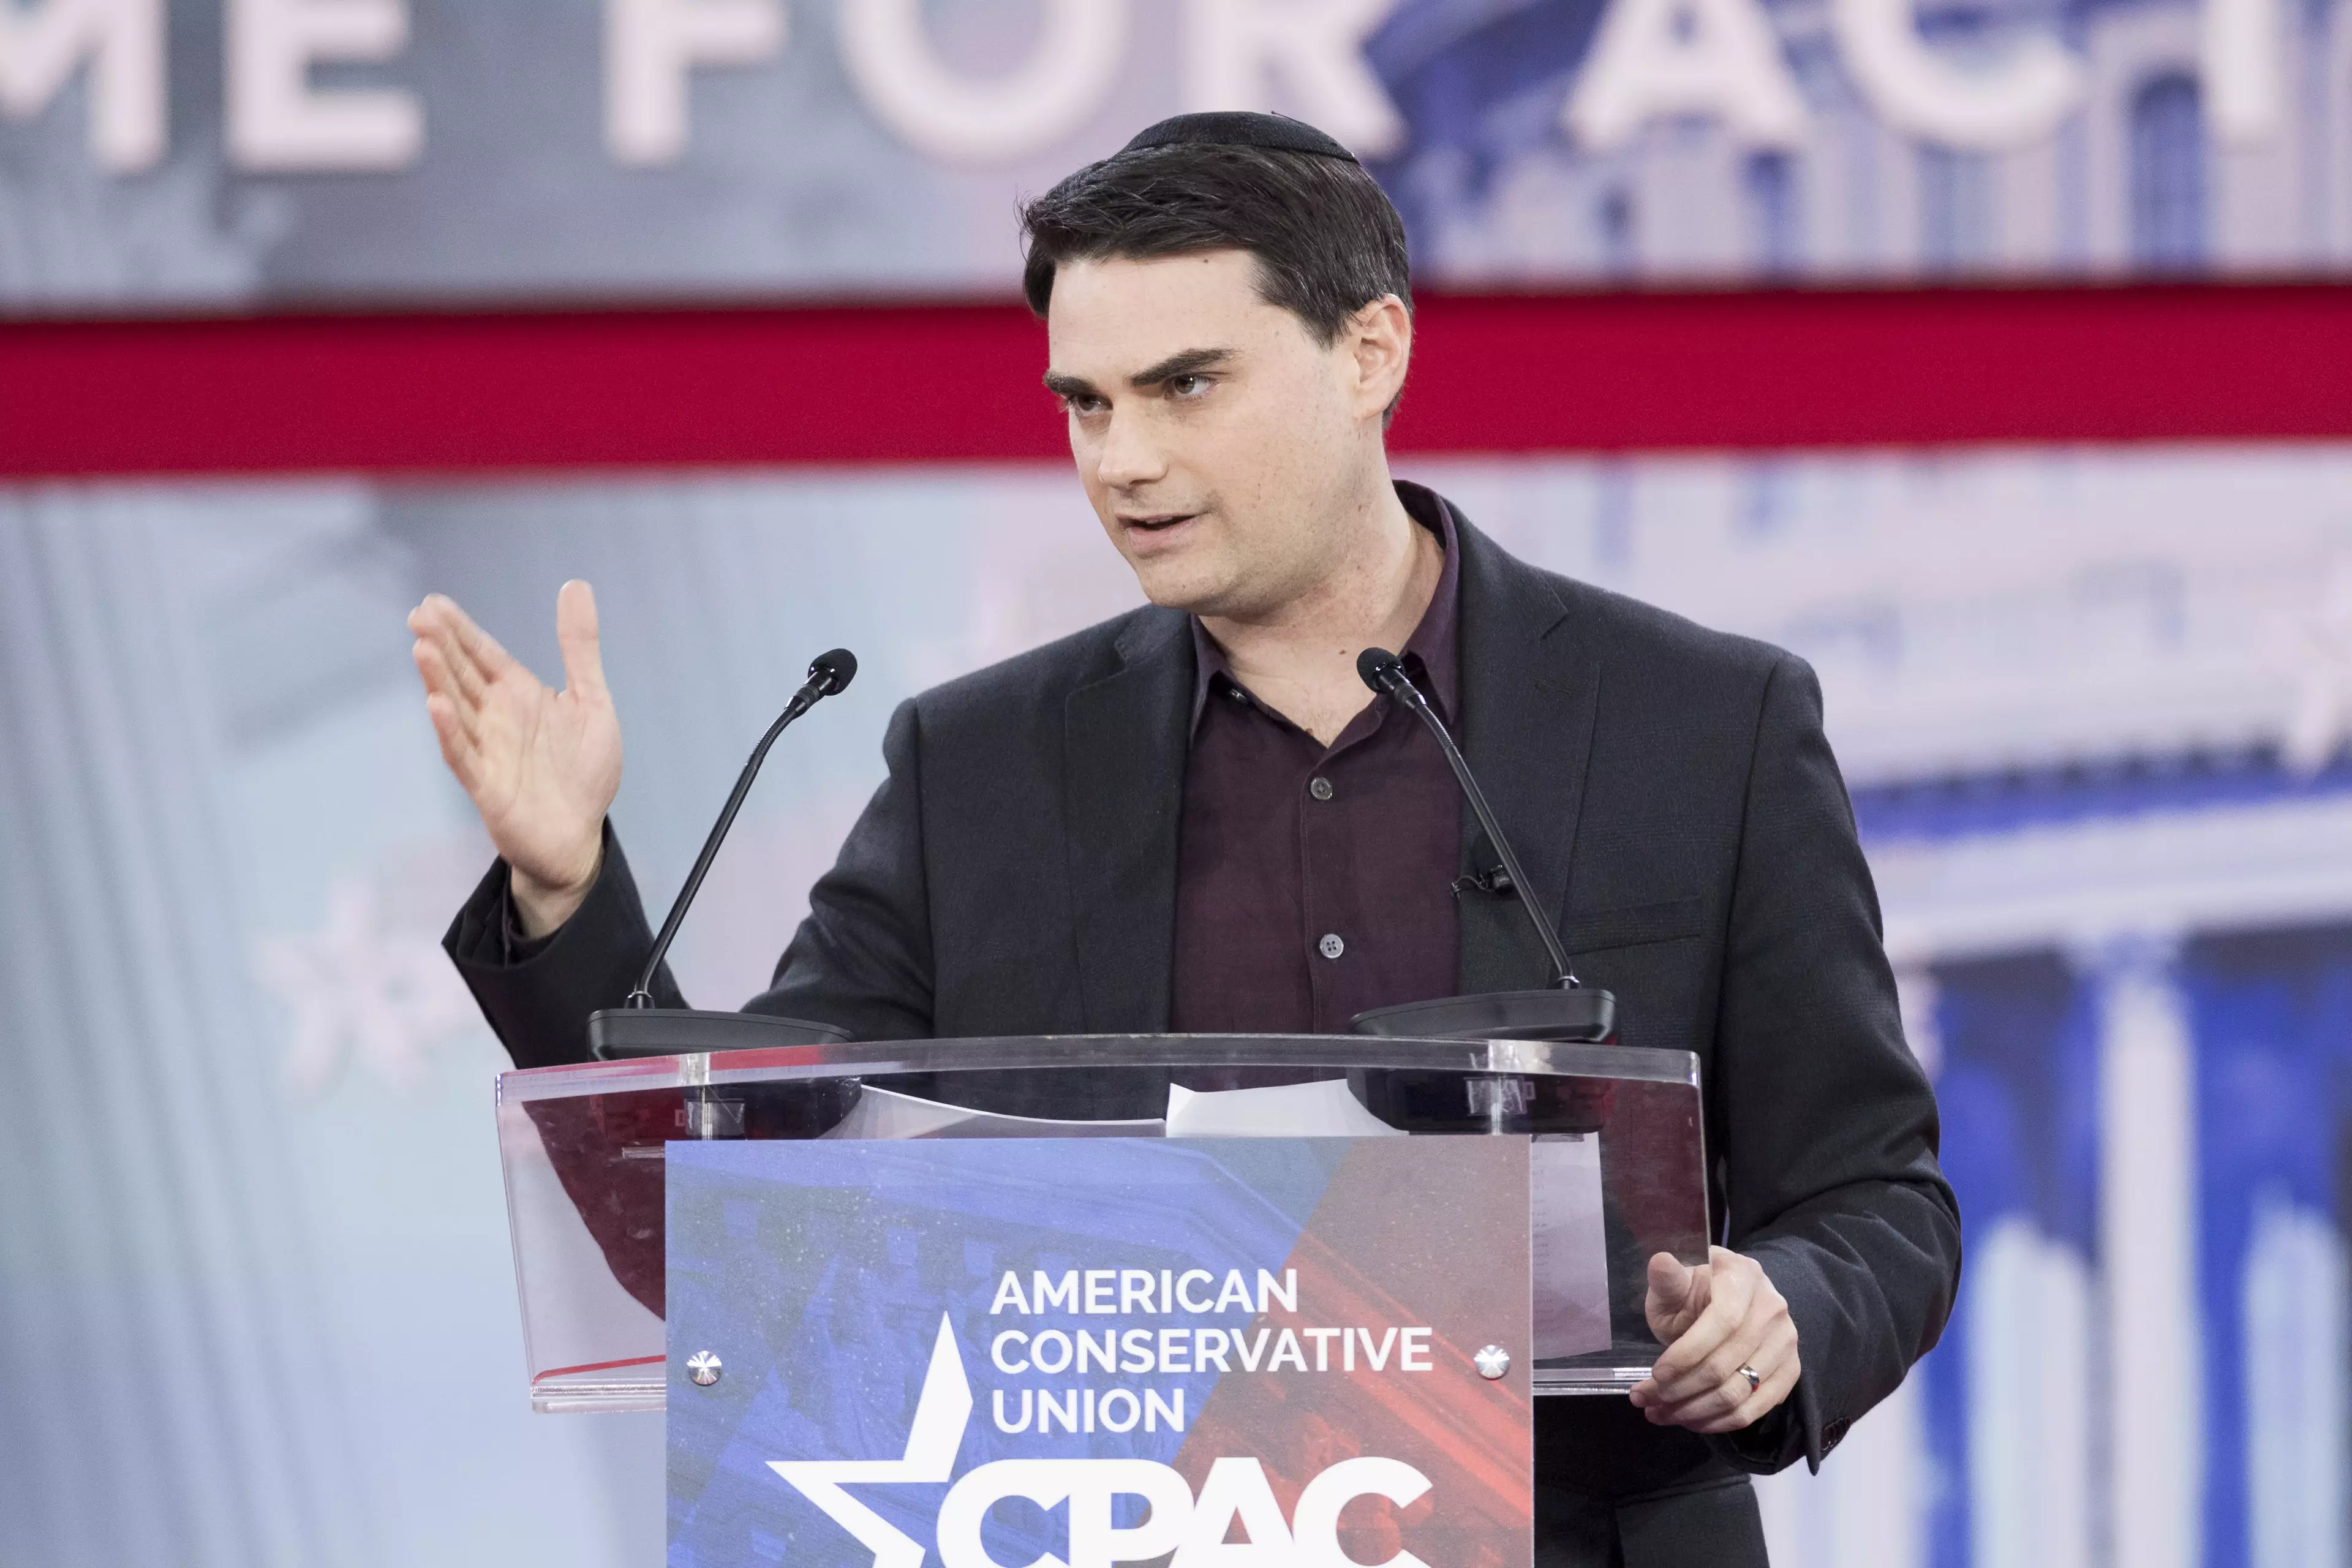 Carano has now signed a deal with Ben Shapiro.